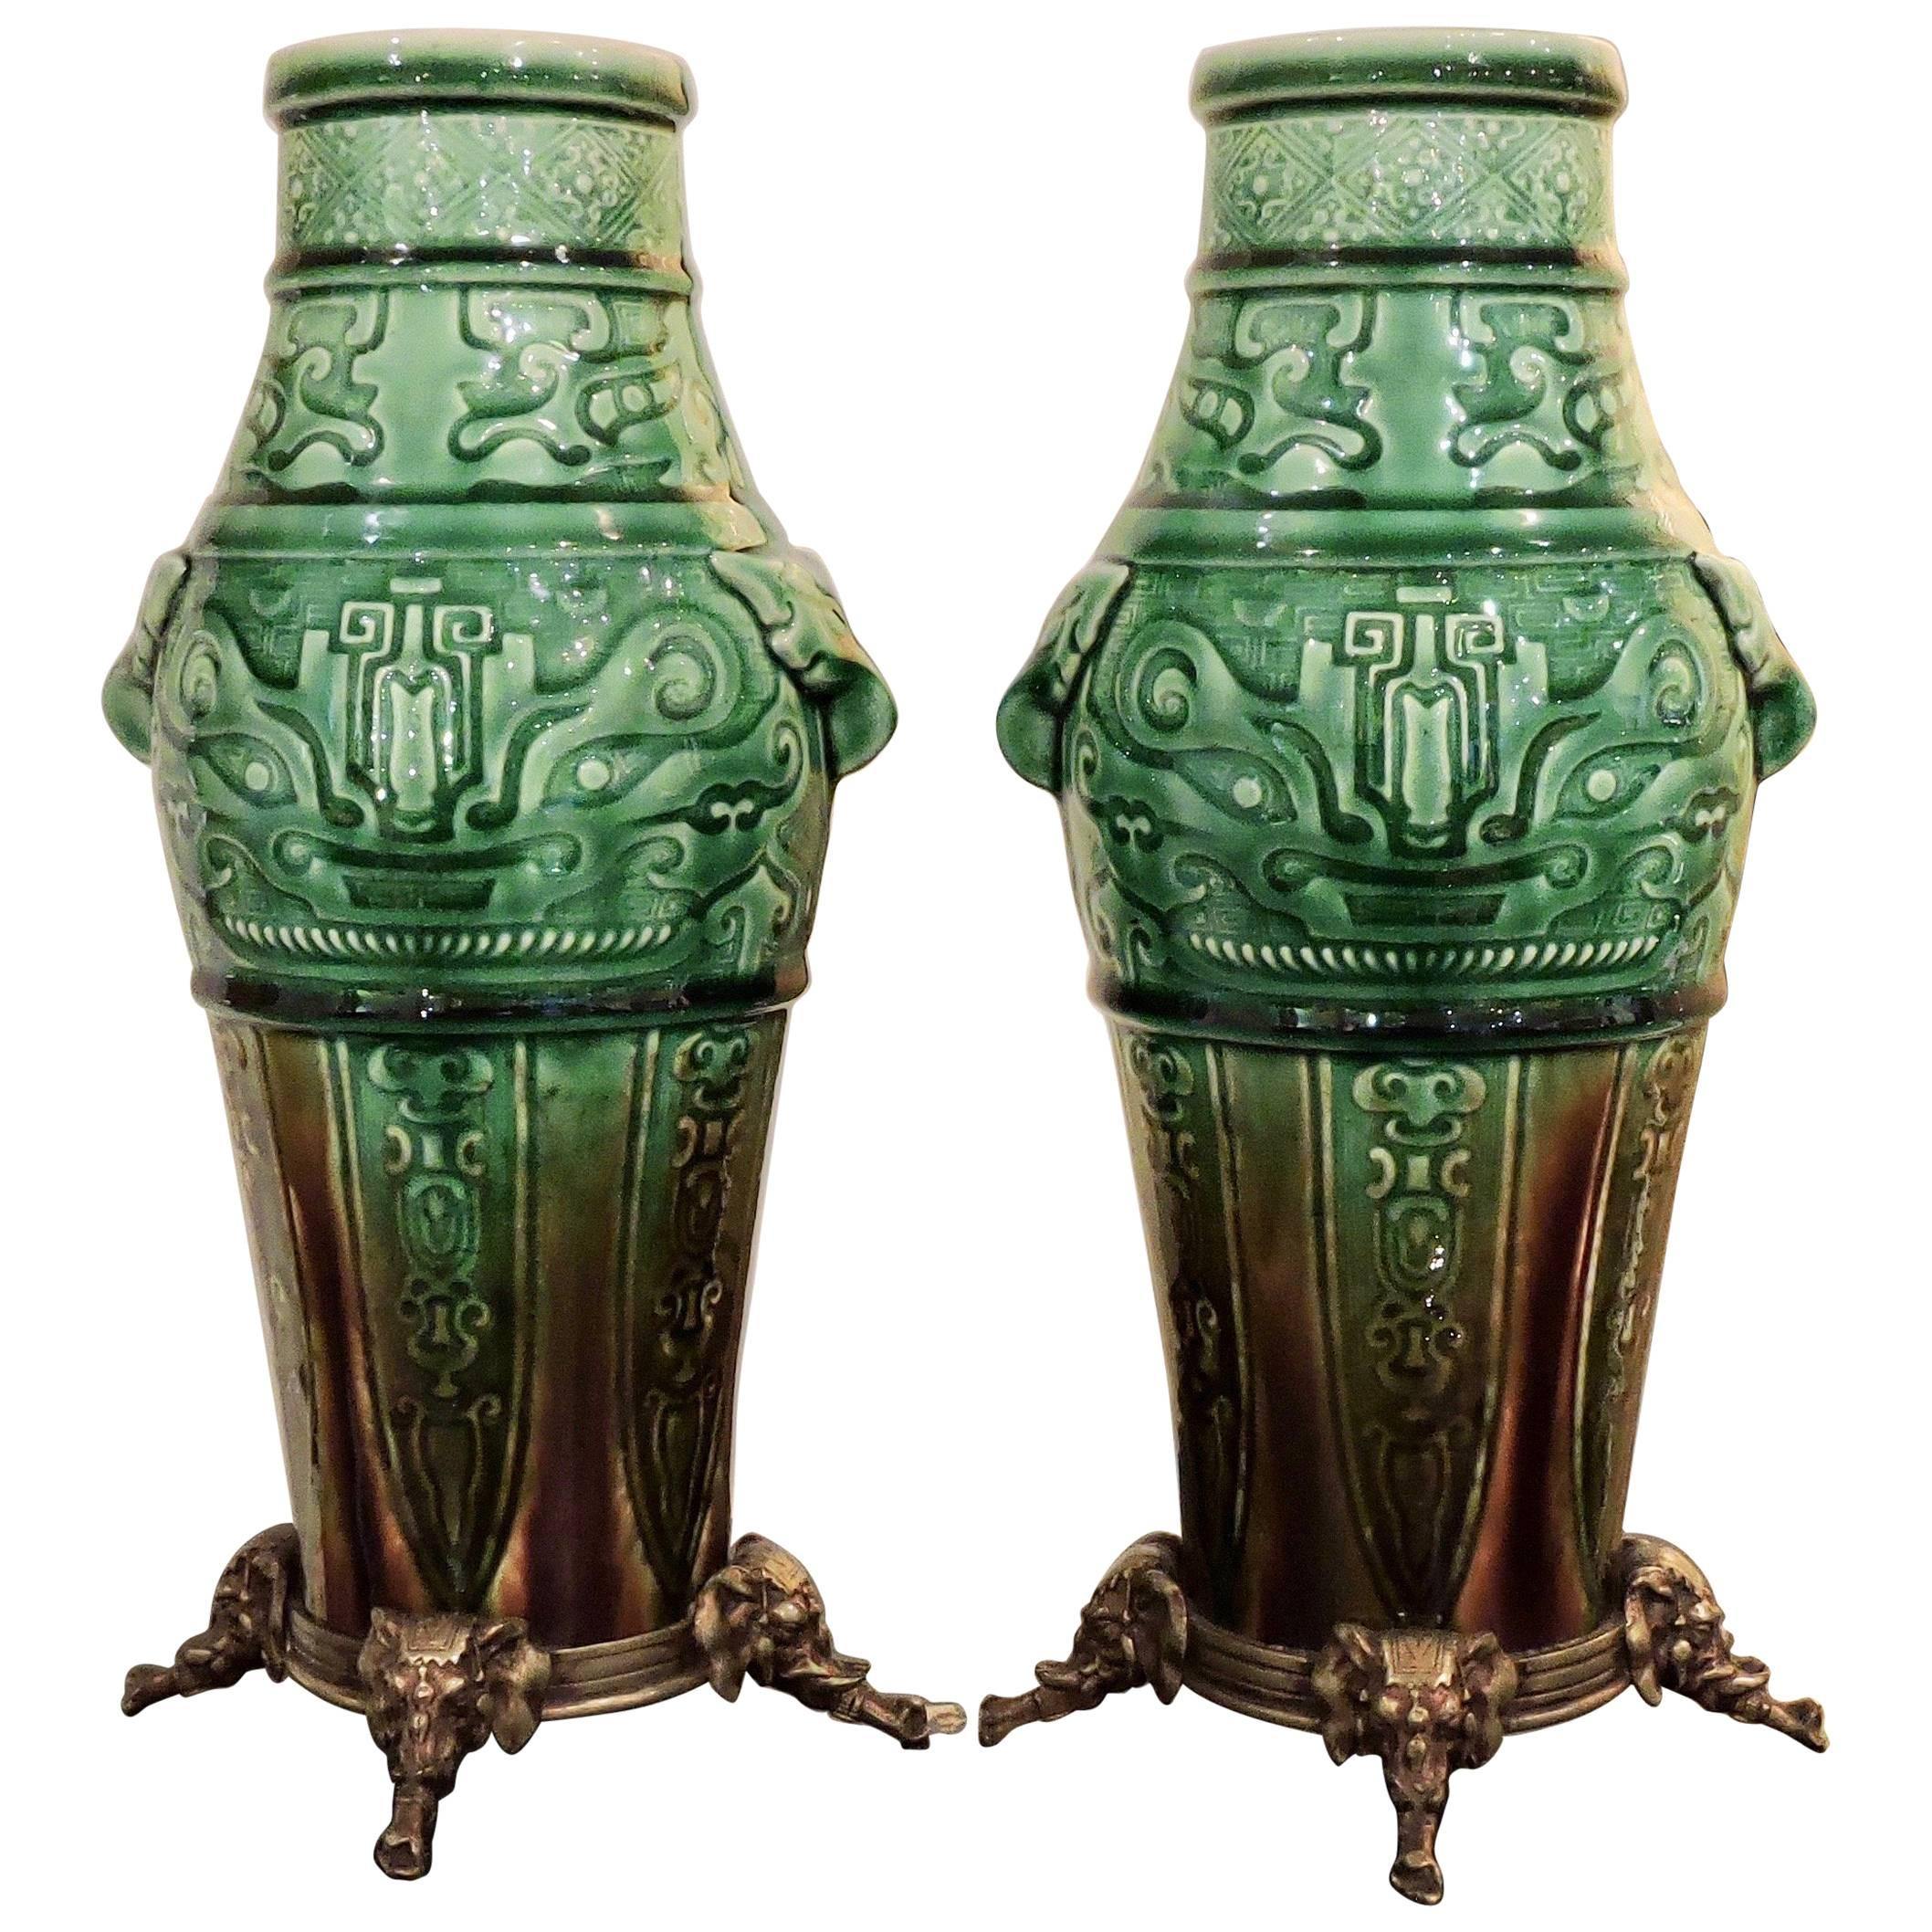 Theodore Deck Faience Celadon Ormolu-Mounted Mounted Pair of Vases